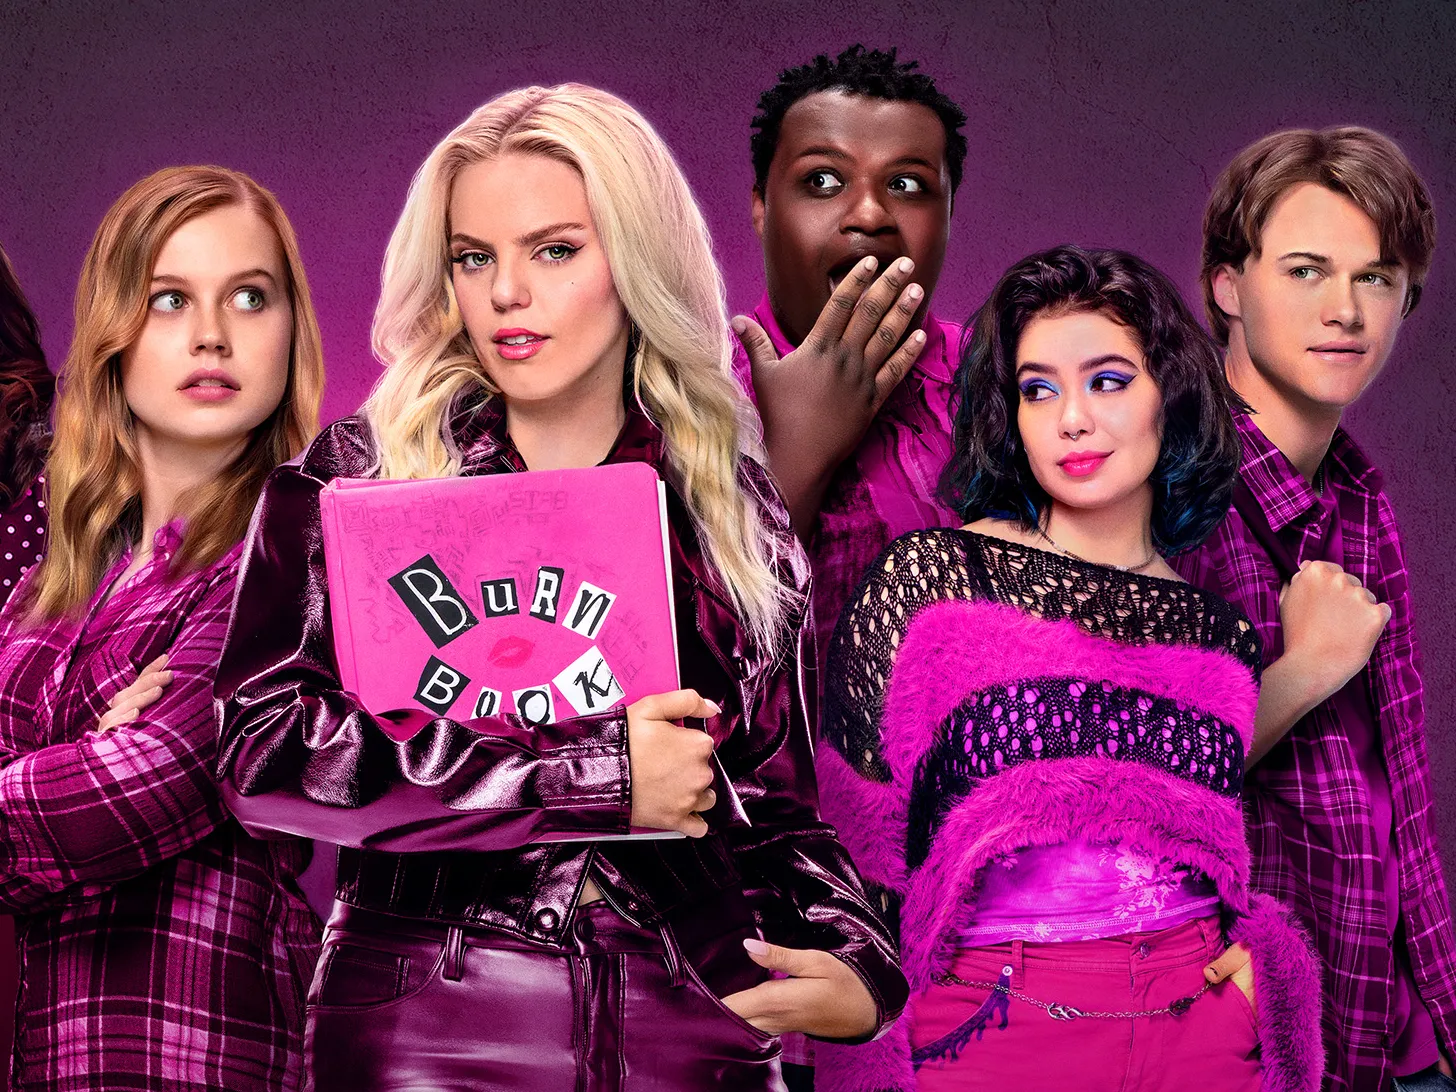 "Mean Girls" Reimagined: A New Take on a Cult Classic